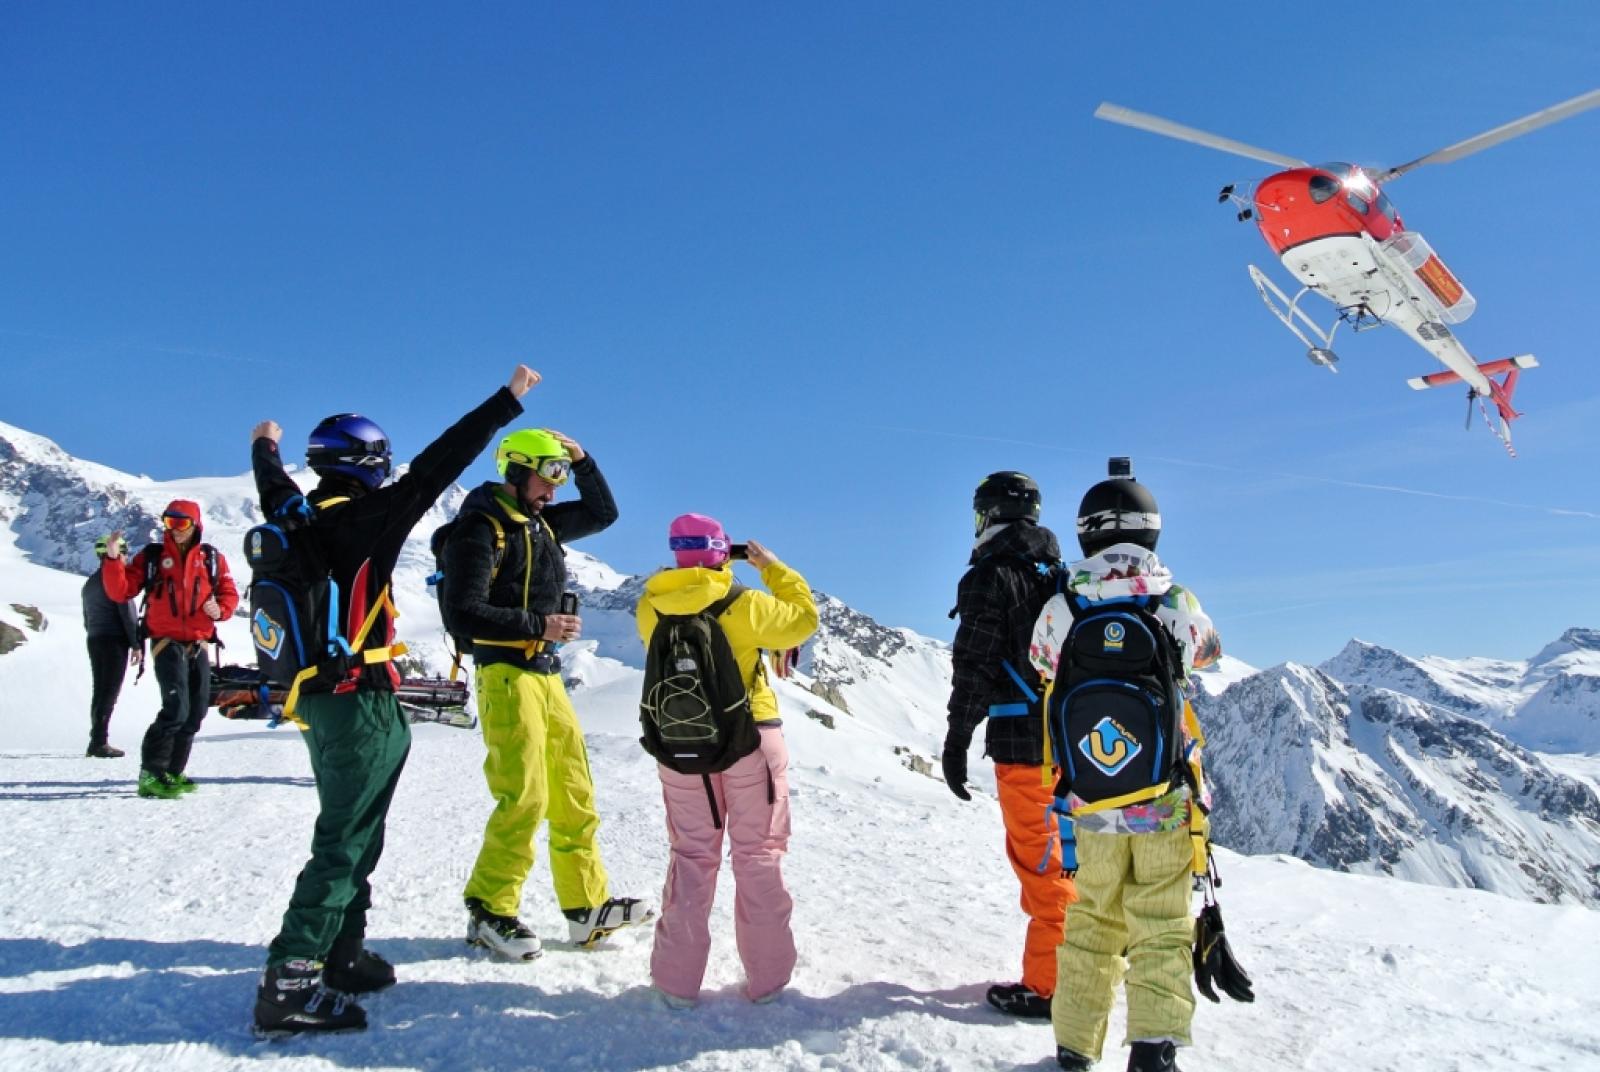 HELI-SKIING BAPTISM – YOUR FIRST EXPERIENCE! HELI-SKIING WITH GRESSONEY – MONTEROSA EXPERIENCE